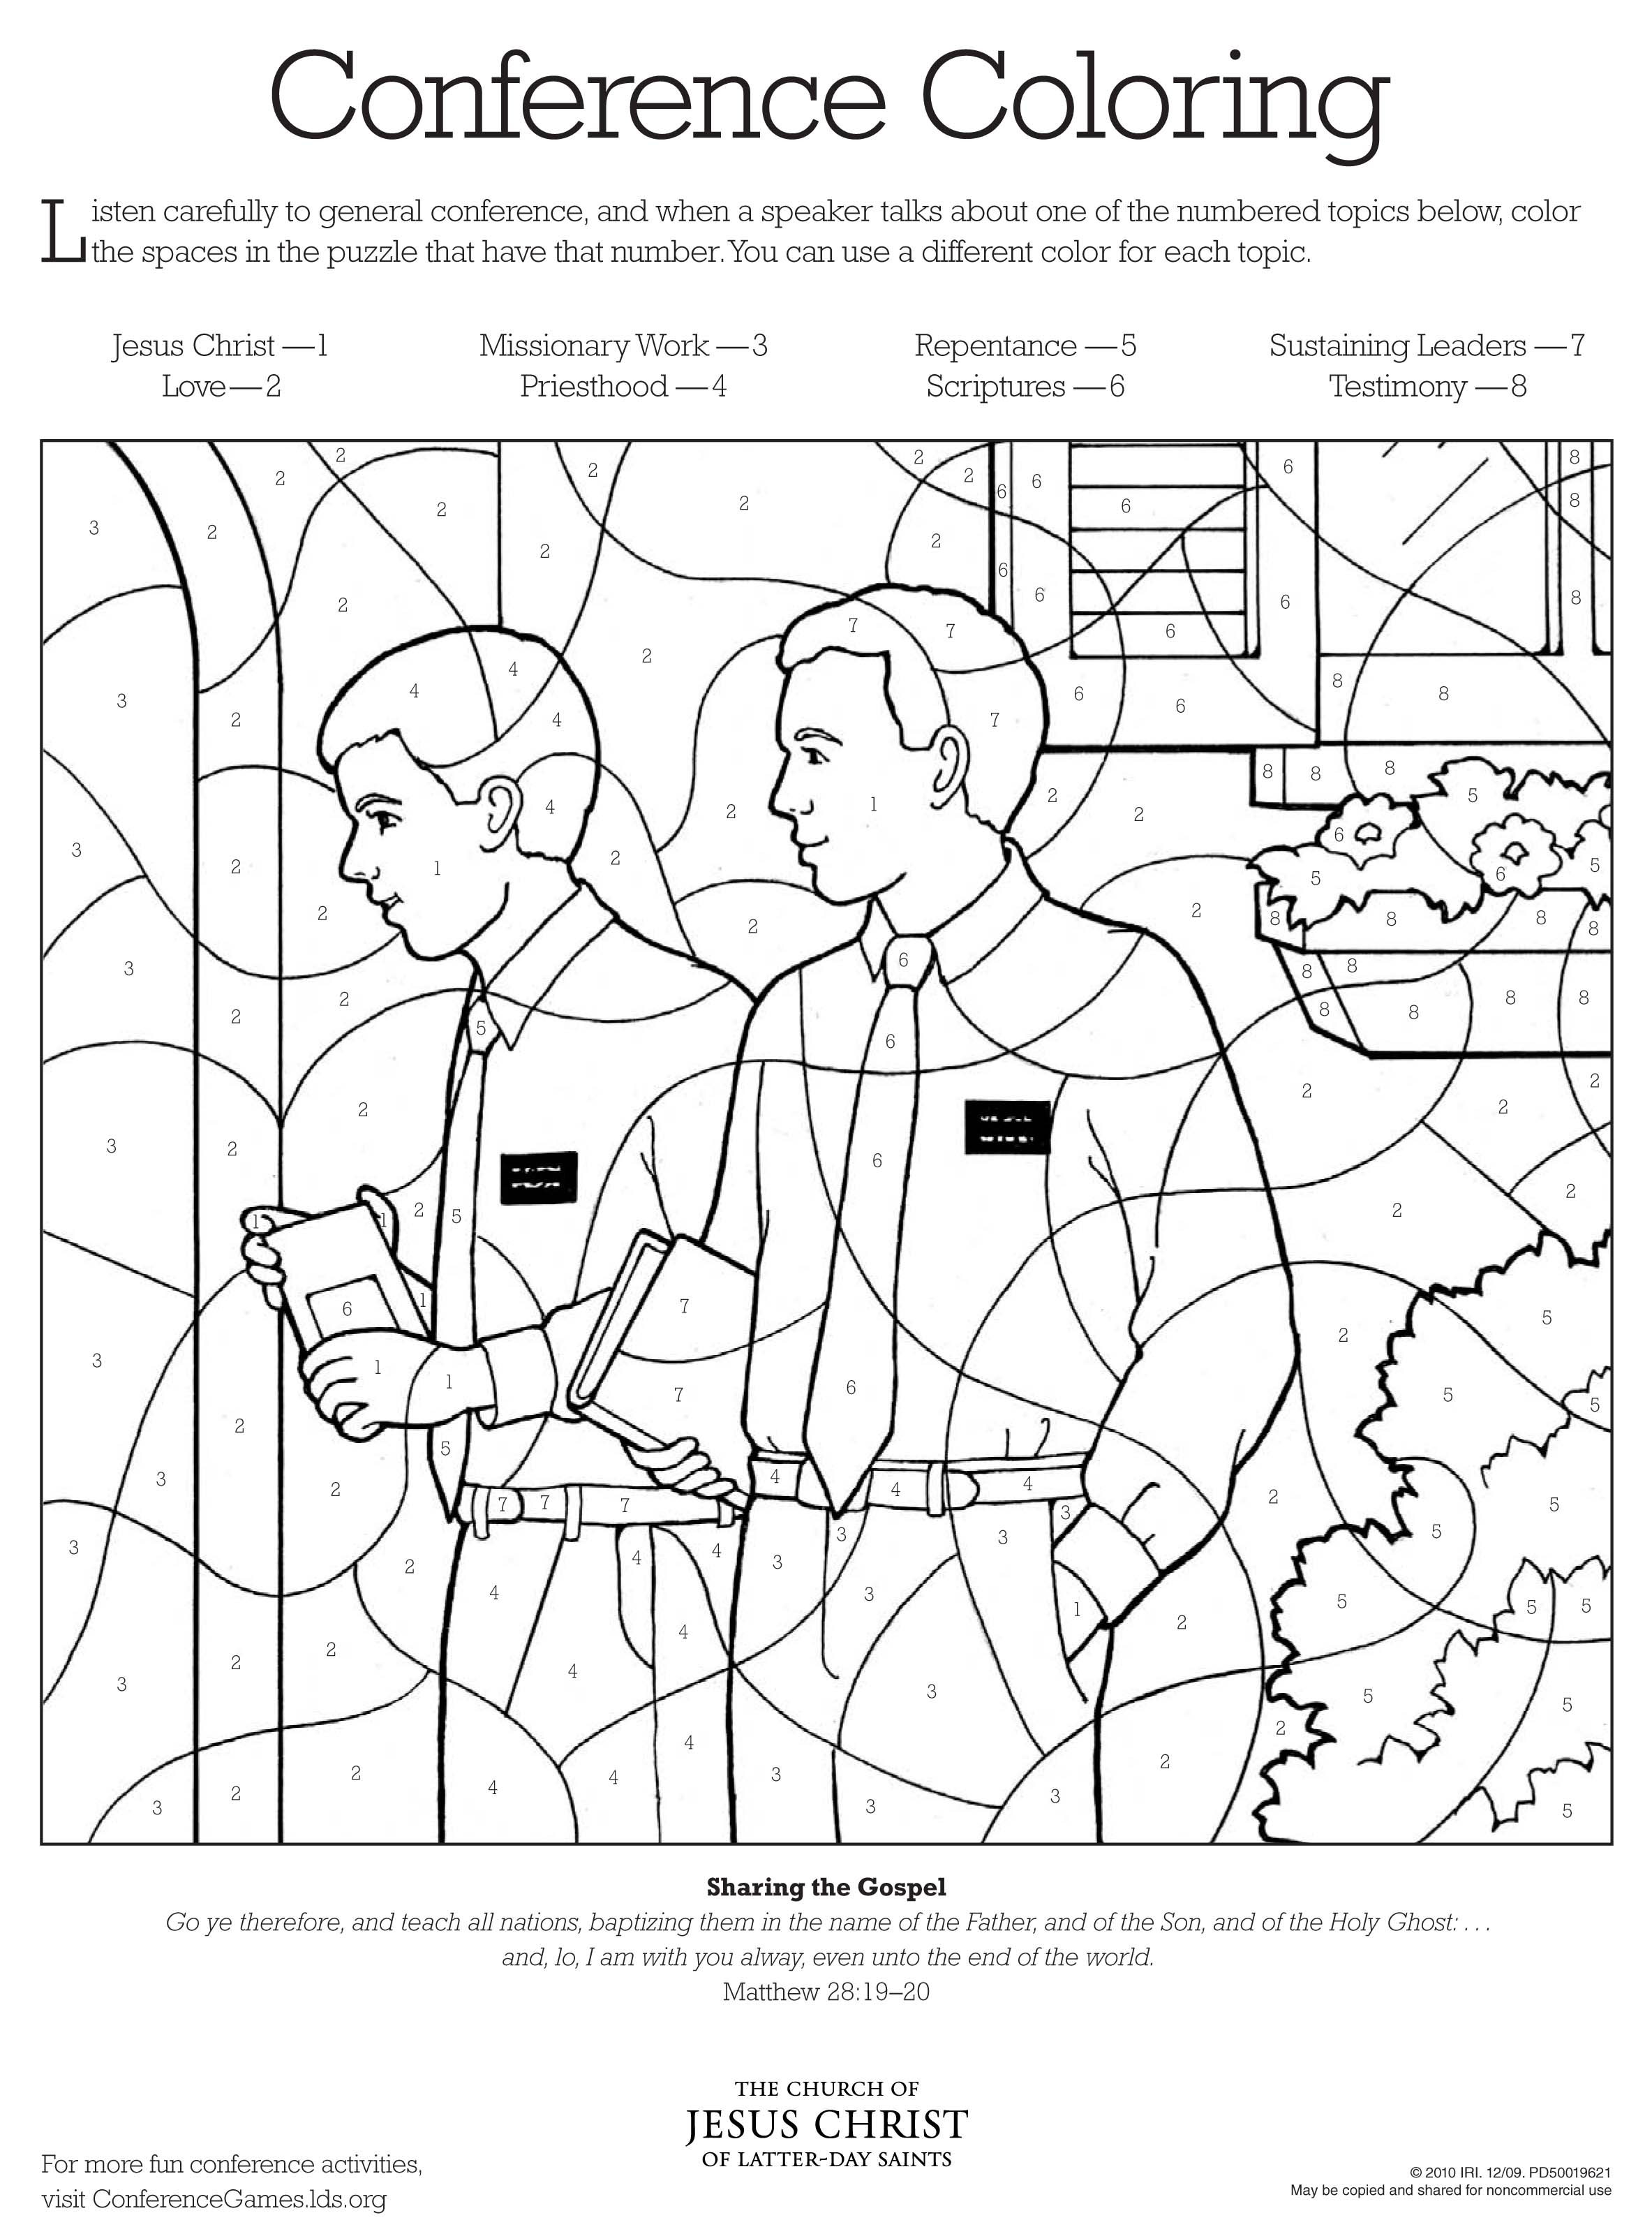 9 Pics of LDS Conference Coloring Pages - LDS Activity Coloring ...